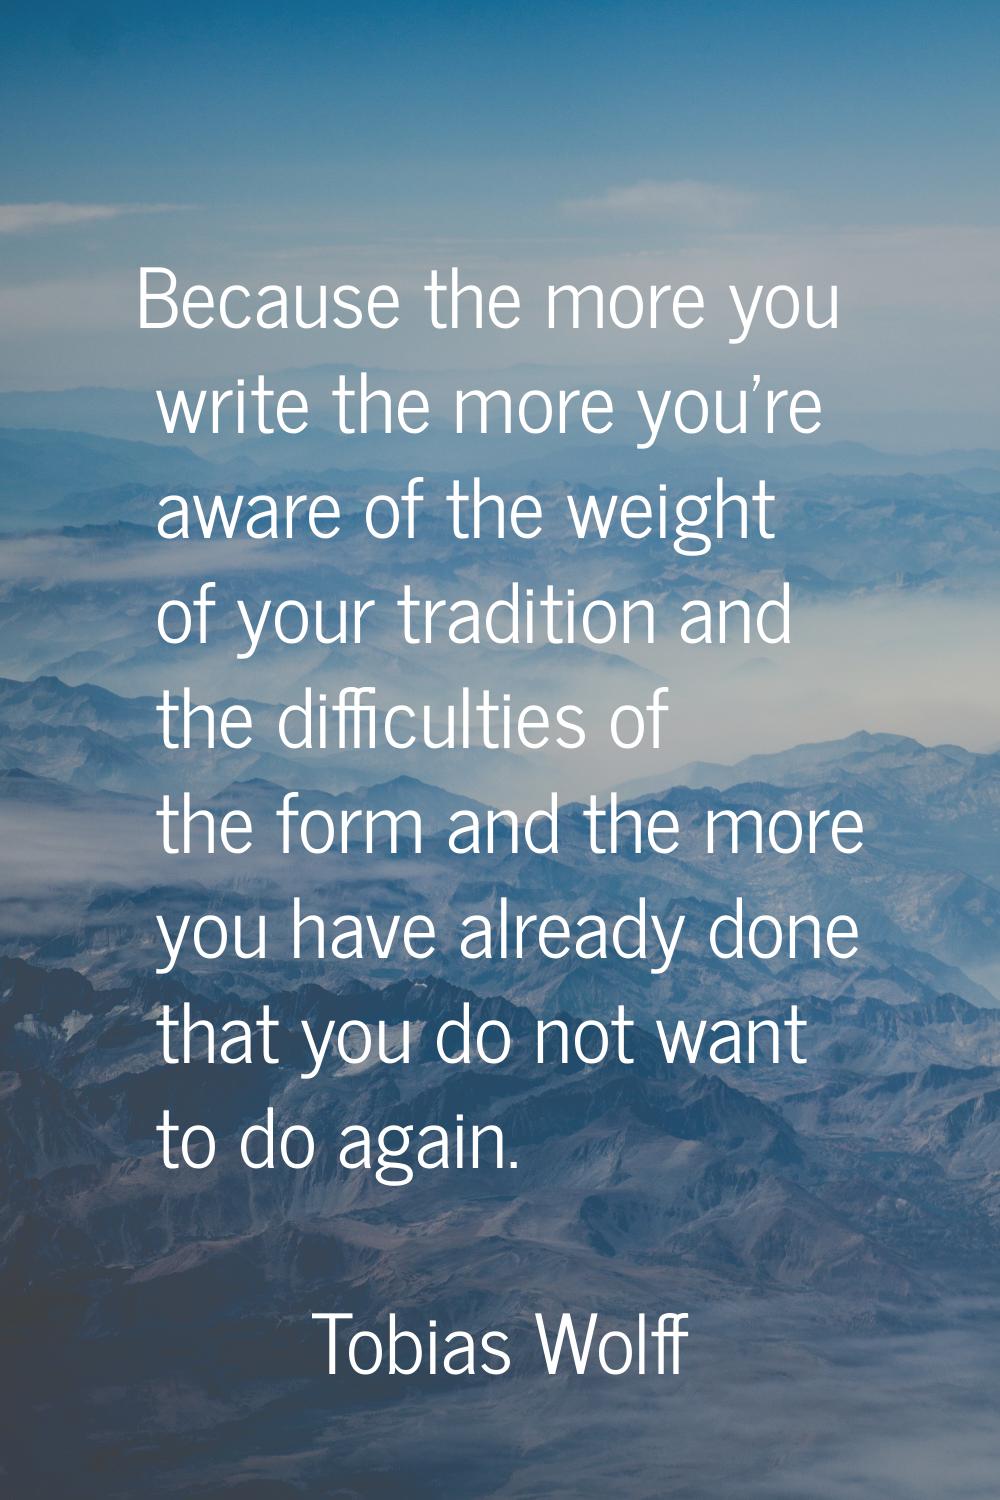 Because the more you write the more you're aware of the weight of your tradition and the difficulti